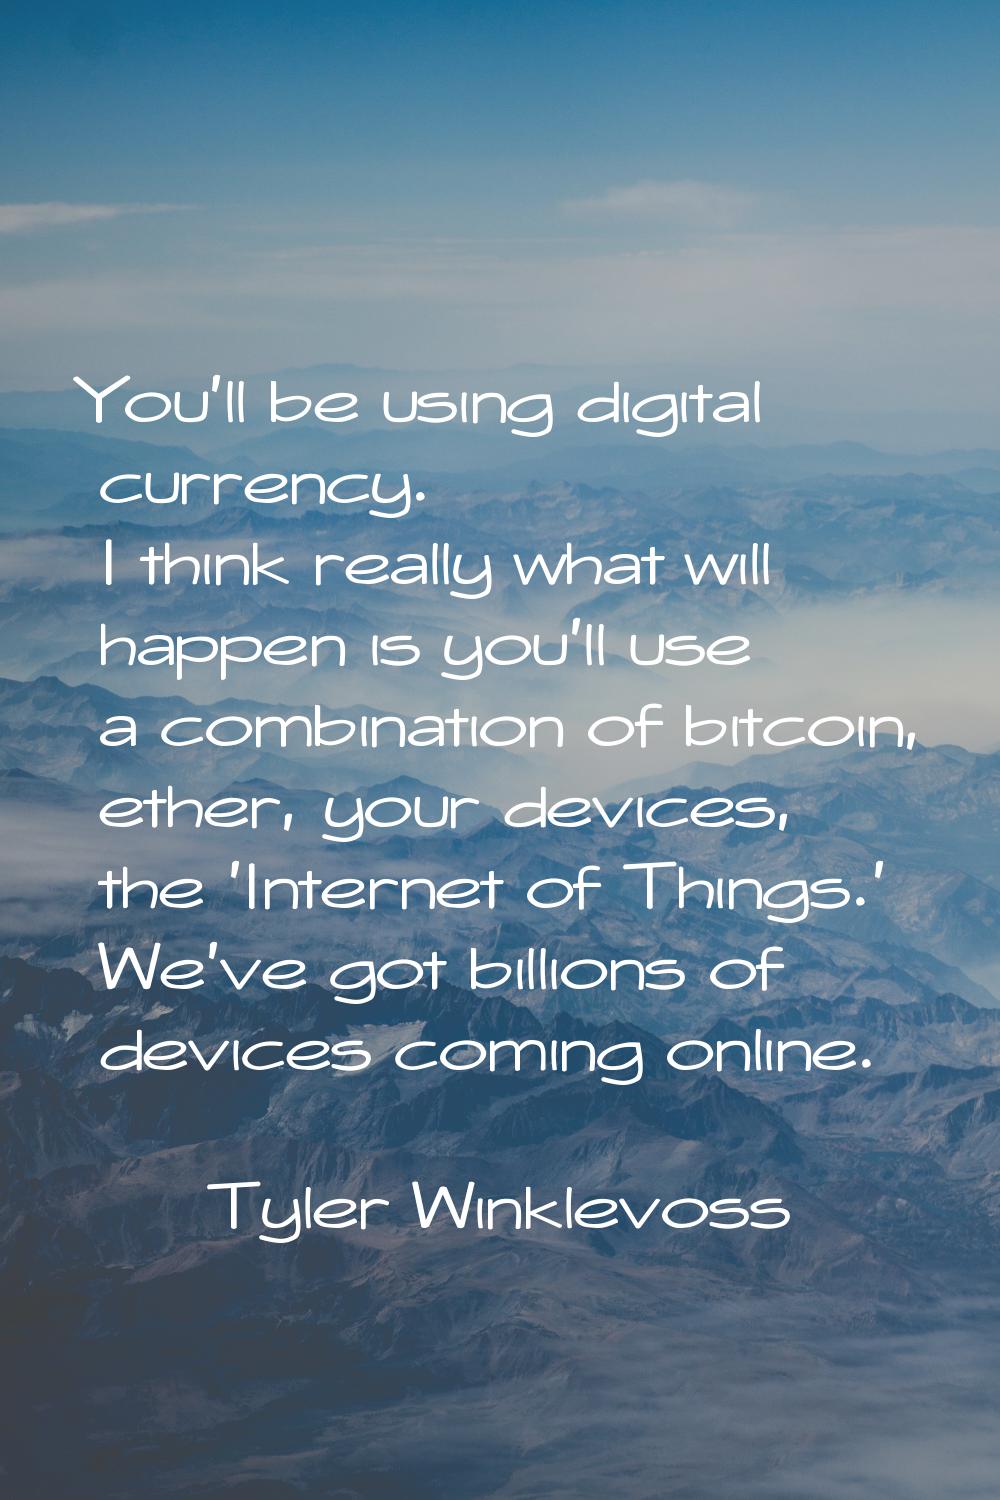 You'll be using digital currency. I think really what will happen is you'll use a combination of bi